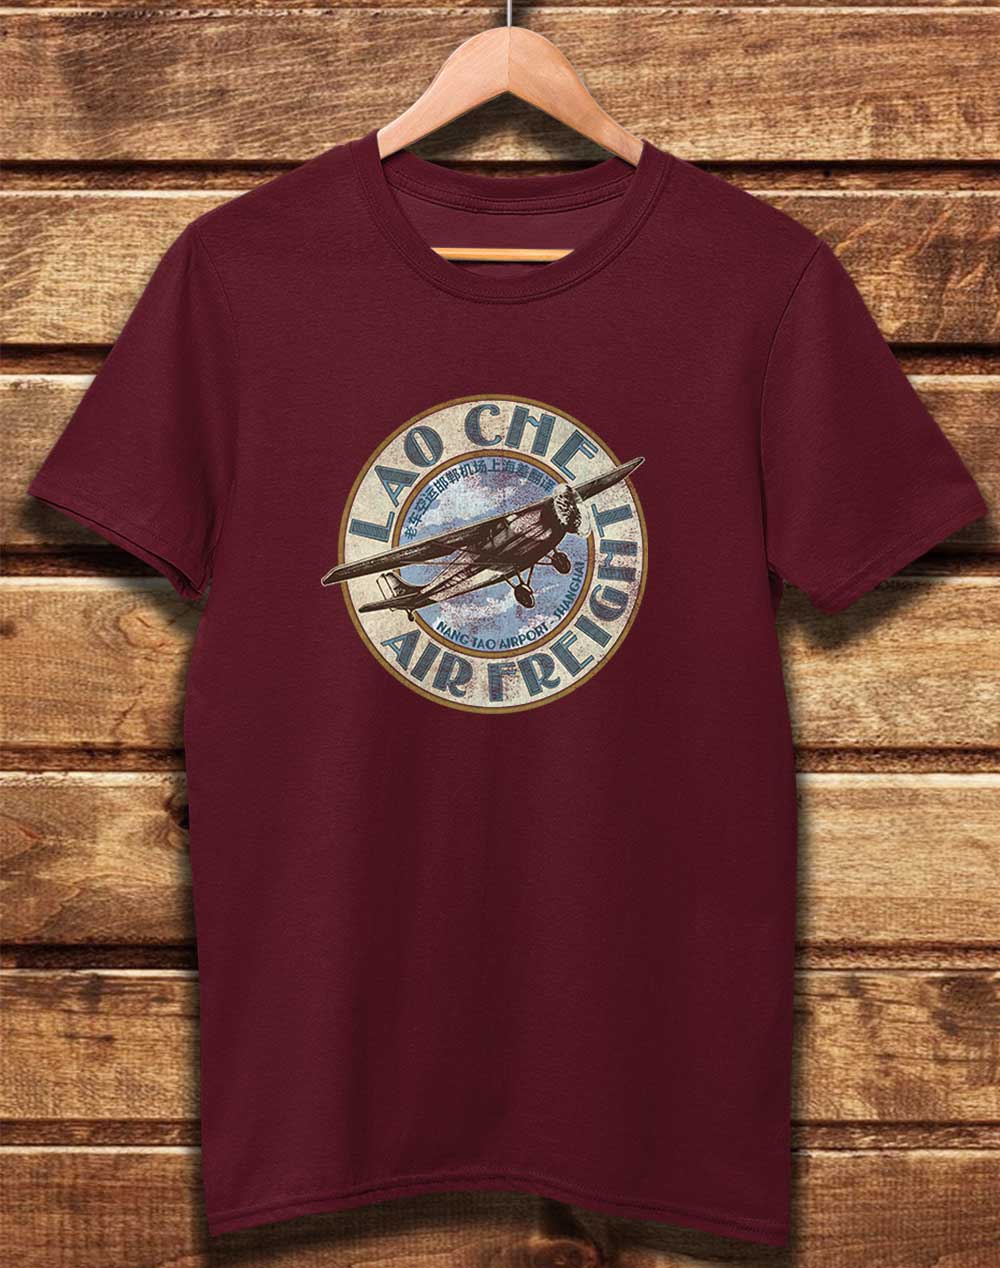 Burgundy - DELUXE Lao Che Air Freight Organic Cotton T-Shirt